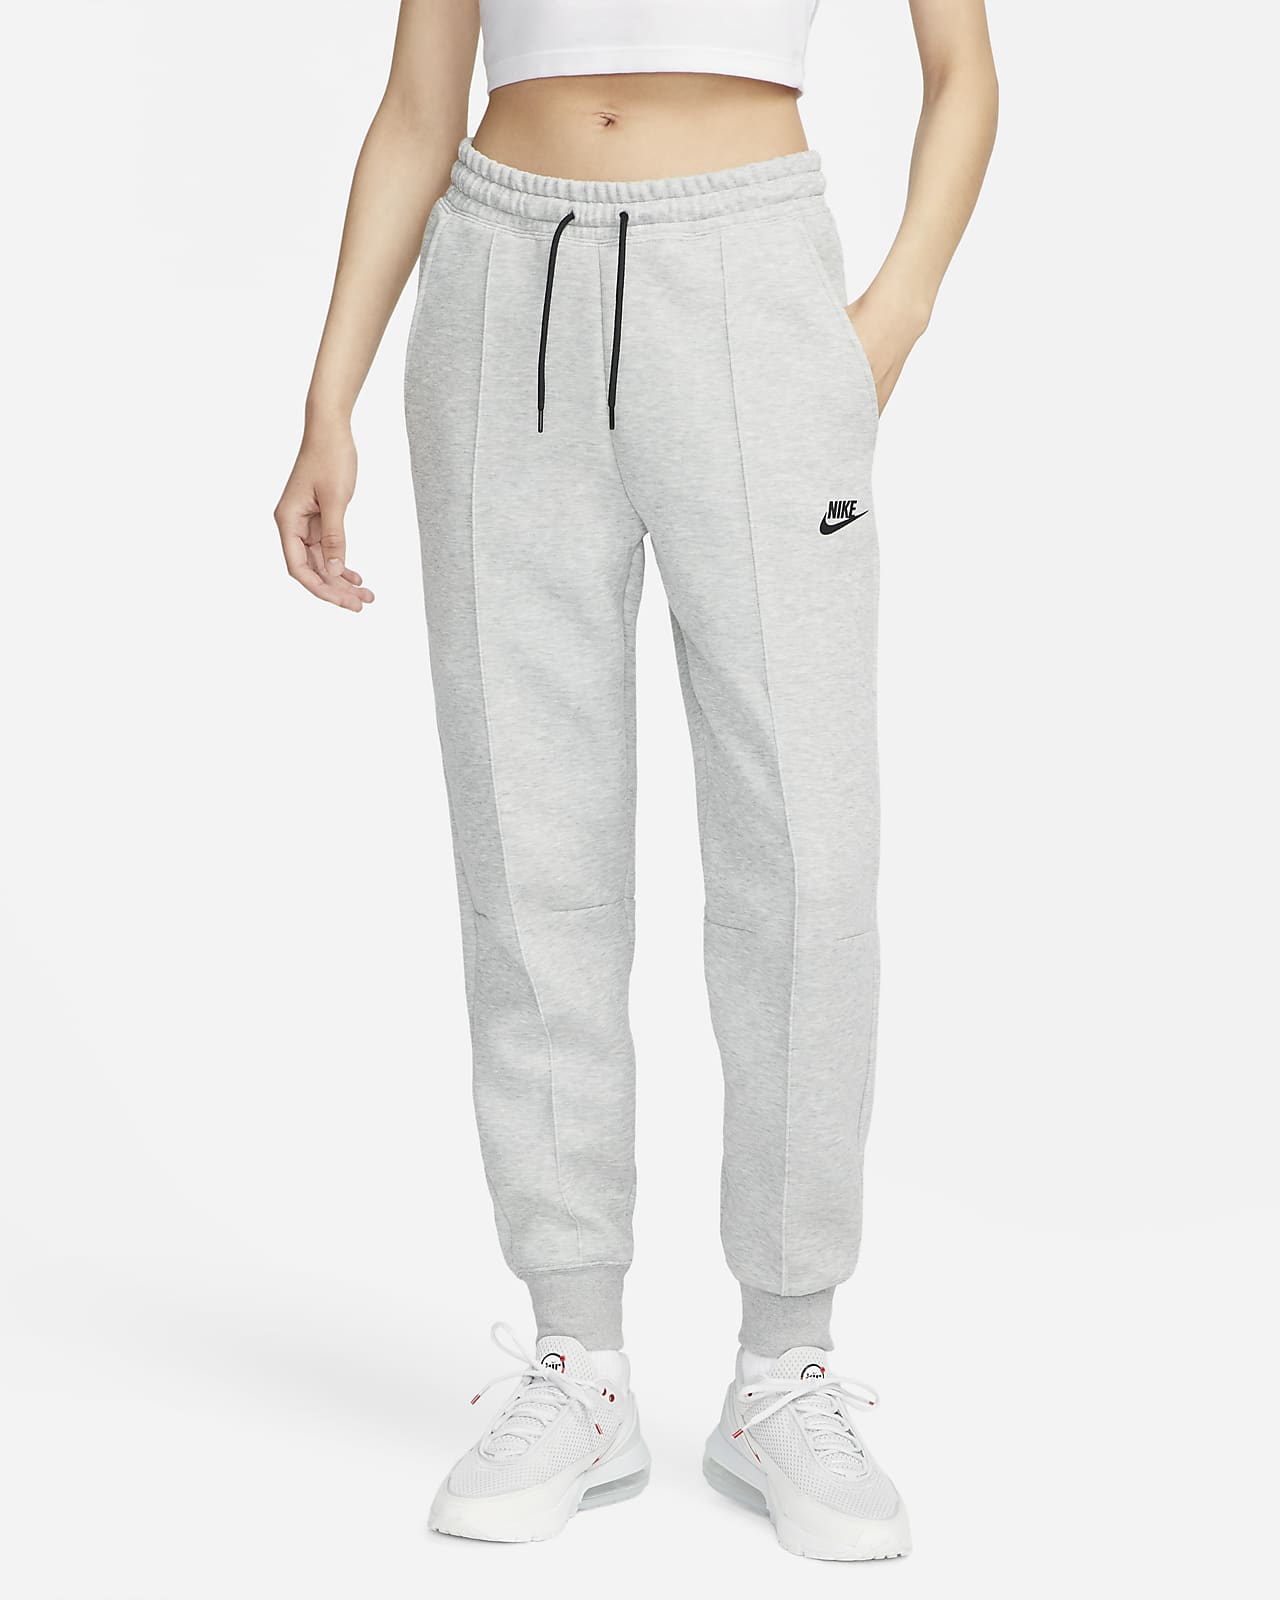 Nike ribbed jersey sweatpants in gray